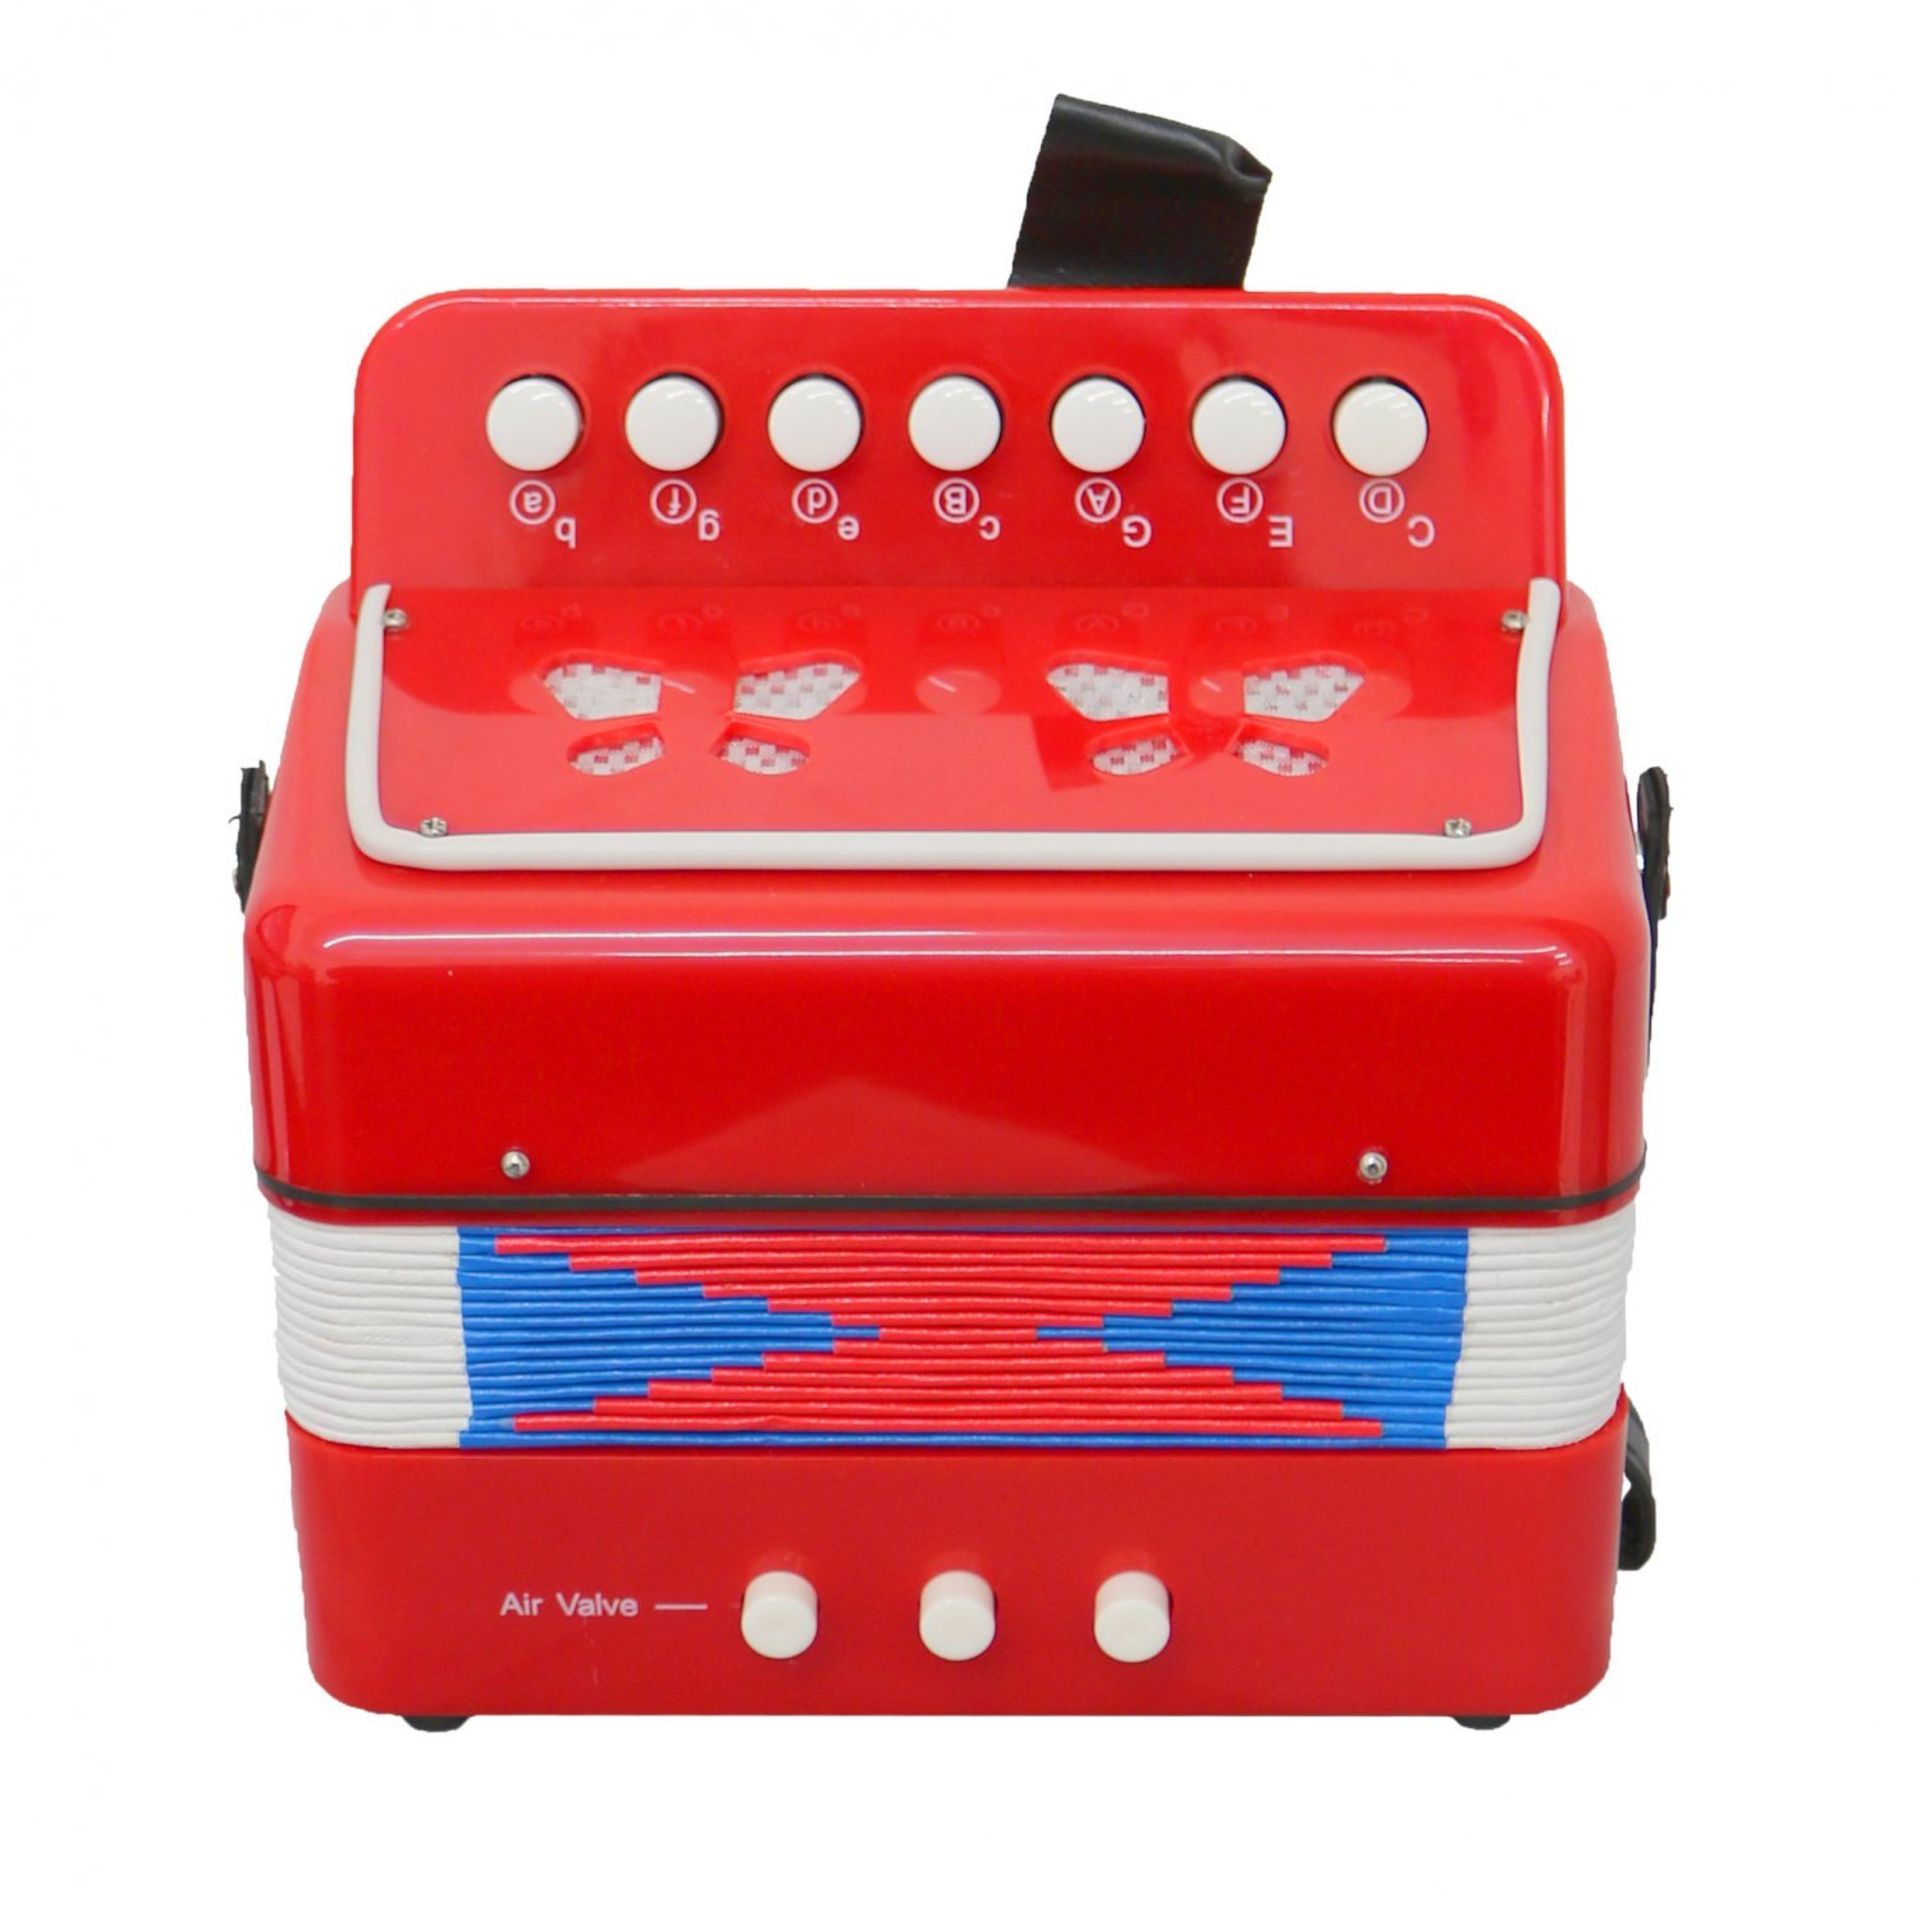 (G72) 7 Keys 2 Bass Children's Red Toy Accordion Musical Instrument Heavy Duty Sprung Buttons ... - Image 2 of 3